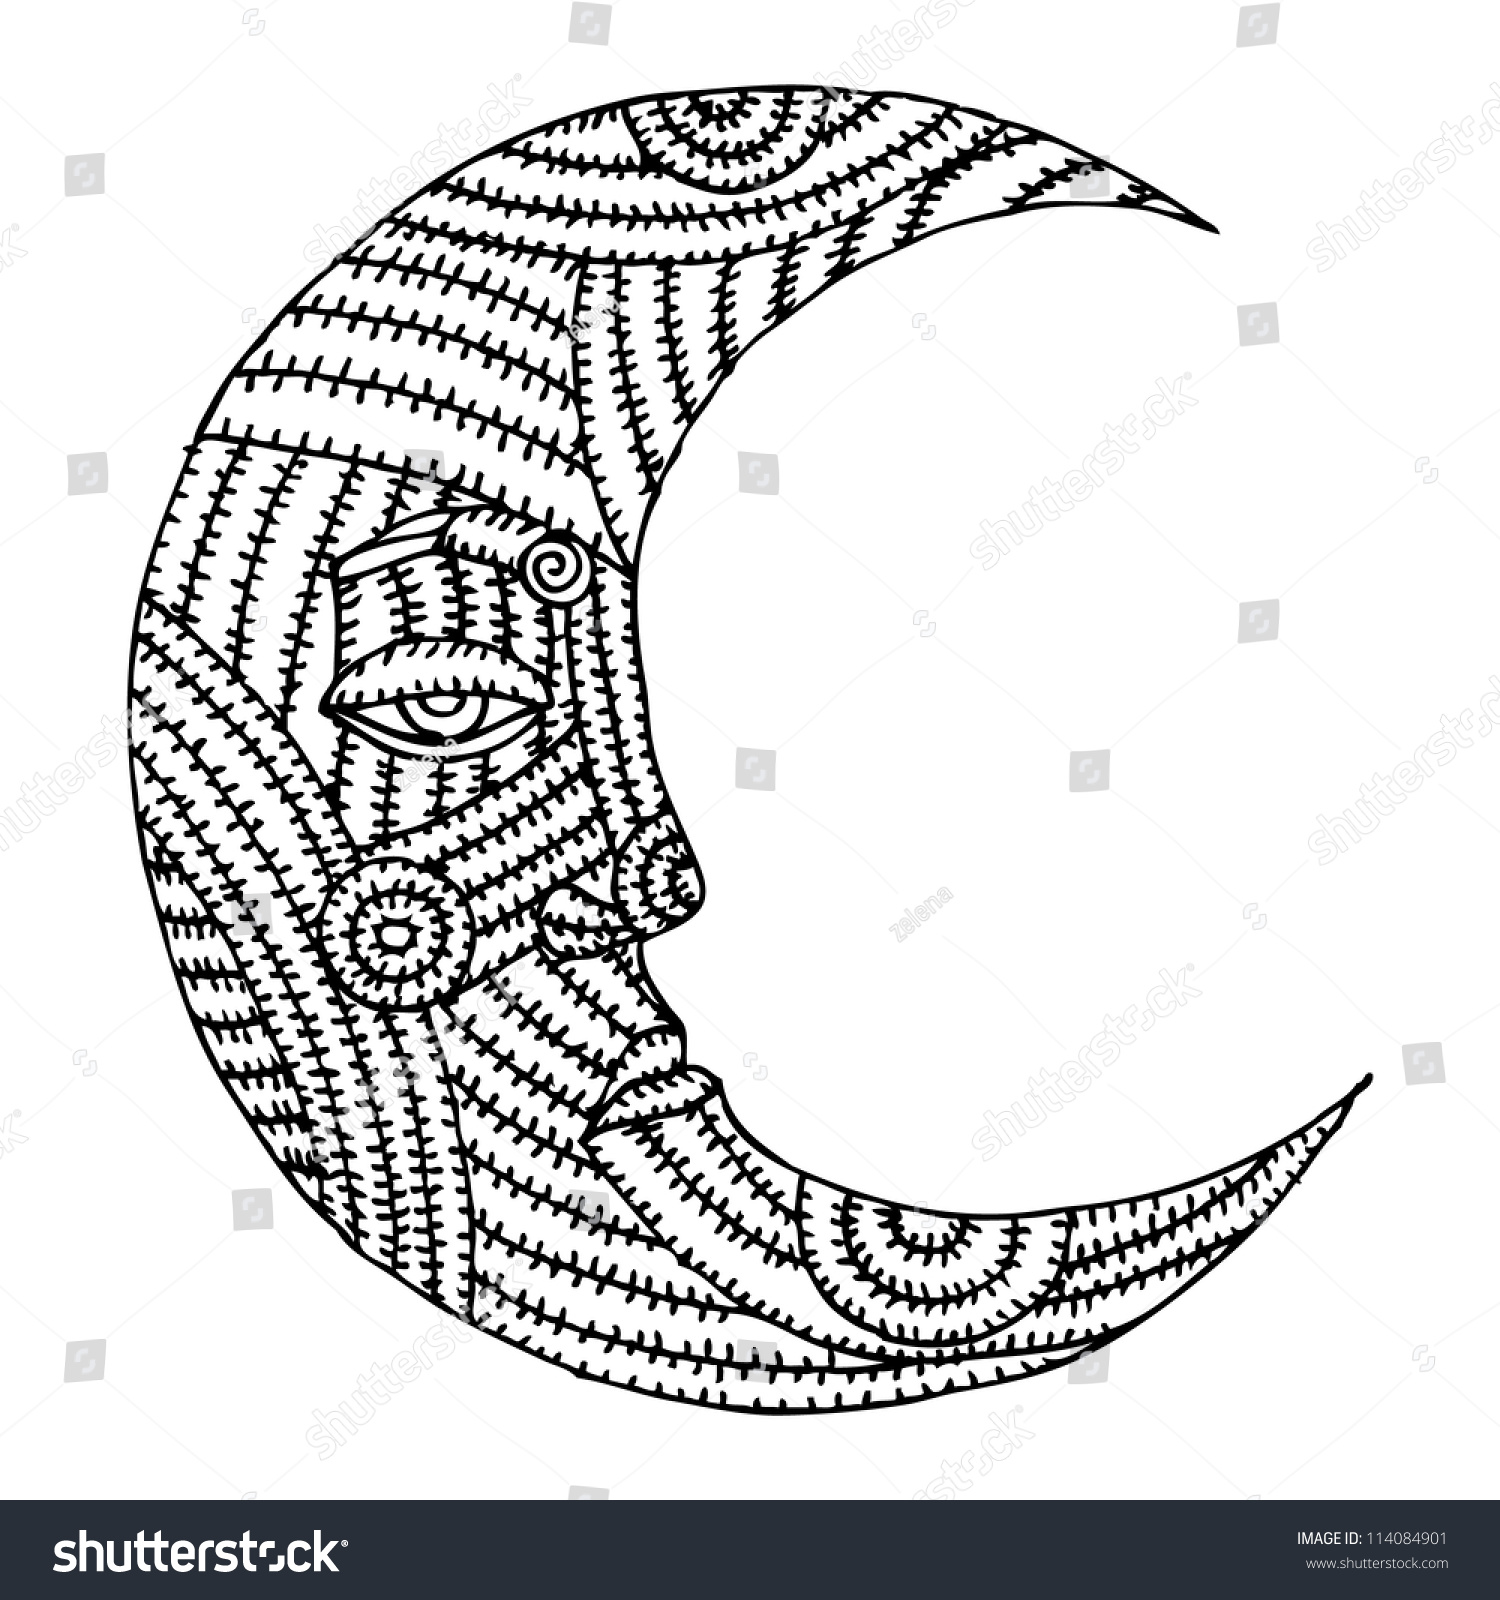 Original Black And White Drawing Of Moon Stock Vector Illustration